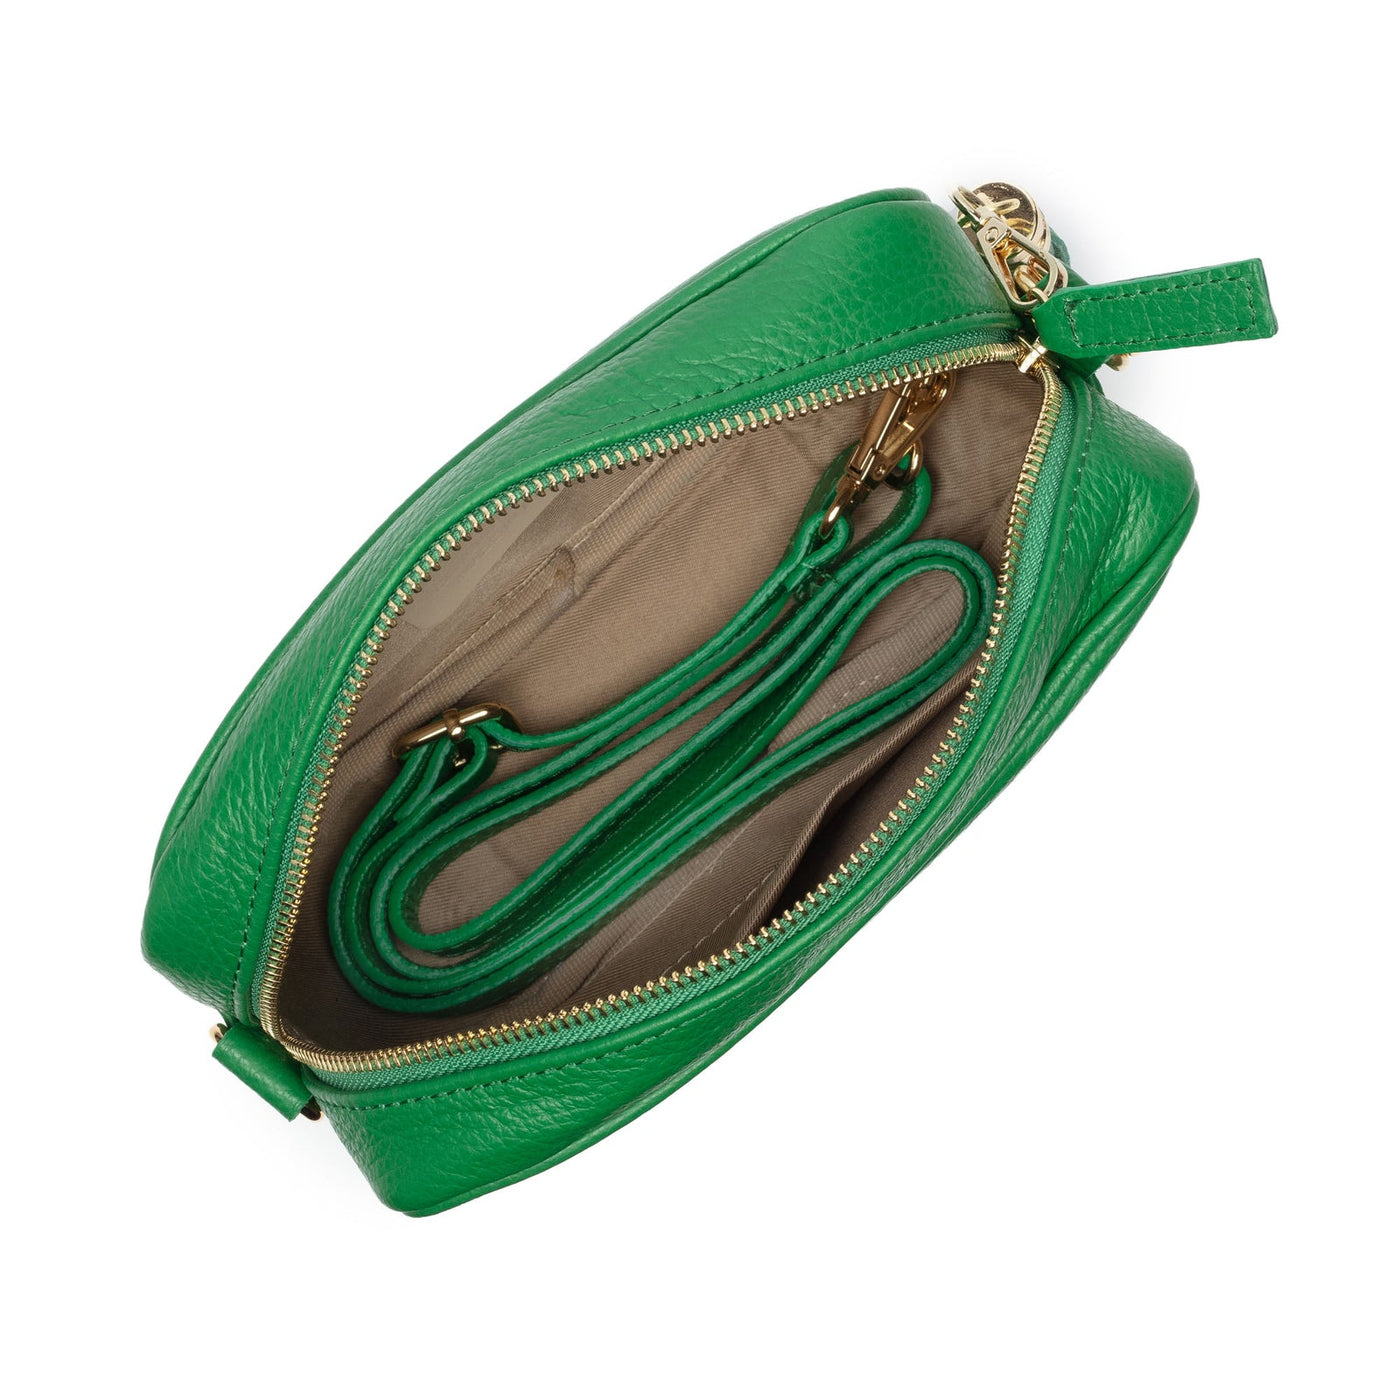 Bright Green Crossbody Bag With Tassle & Gold Detailing